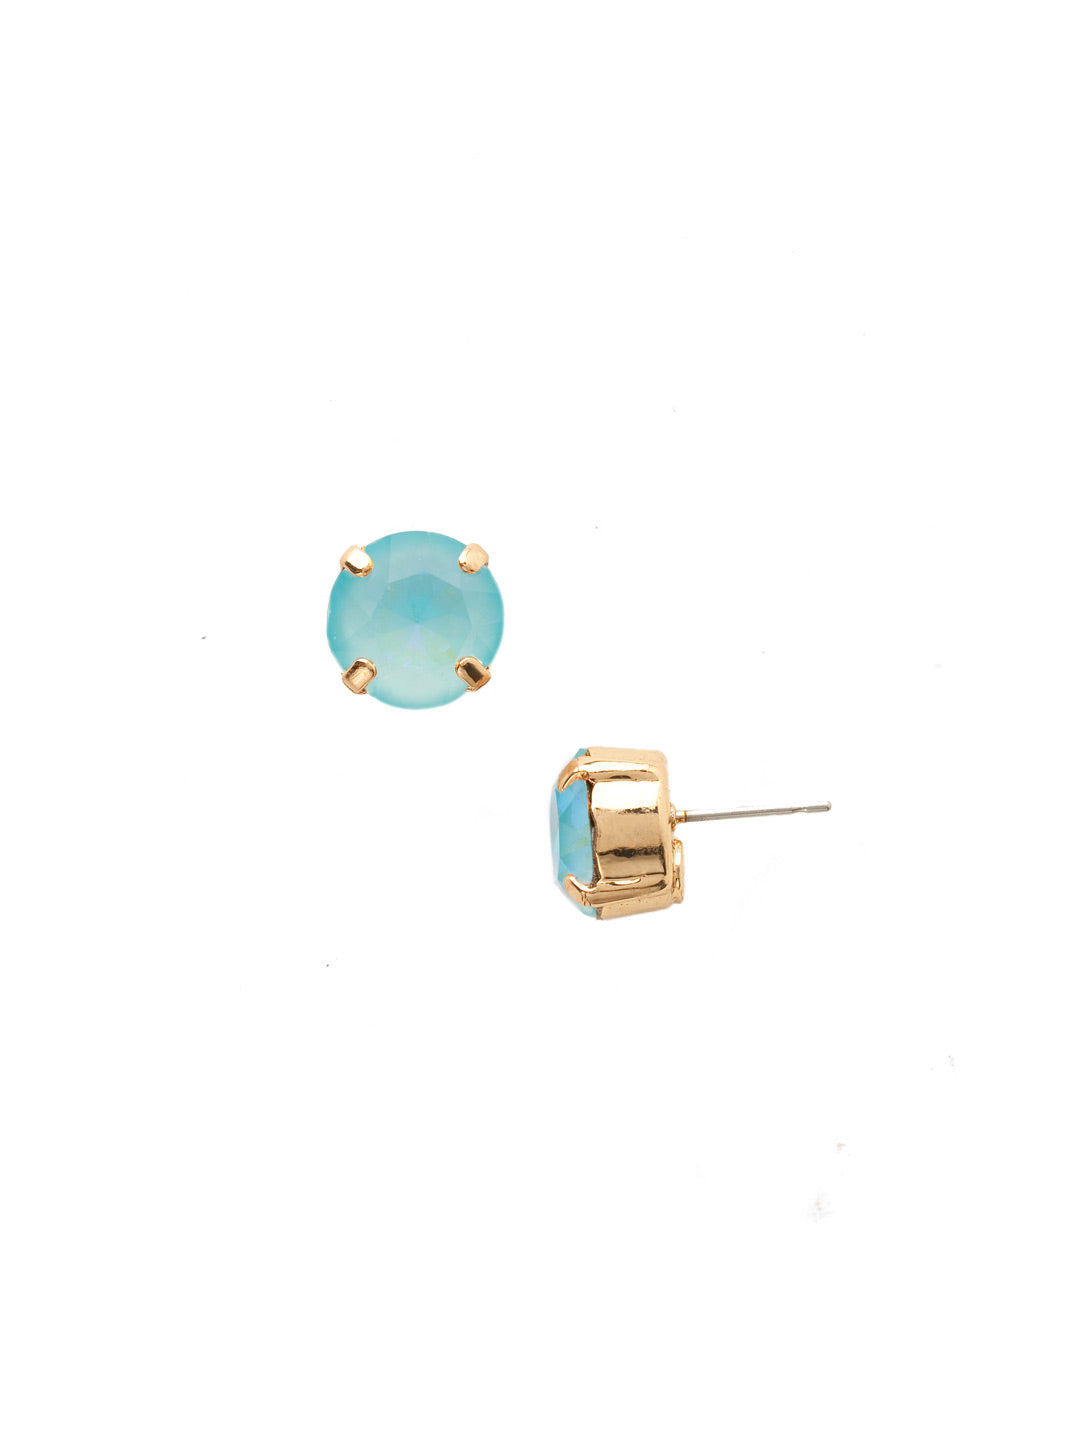 London Stud Earrings - ECM14BGSSU - <p>Everyone needs a great pair of studs. Add some classic sparkle to any occasion with these stud earrings. Need help picking a stud? <a href="https://www.sorrelli.com/blogs/sisterhood/round-stud-earrings-101-a-rundown-of-sizes-styles-and-sparkle">Check out our size guide!</a> From Sorrelli's Seersucker collection in our Bright Gold-tone finish.</p>